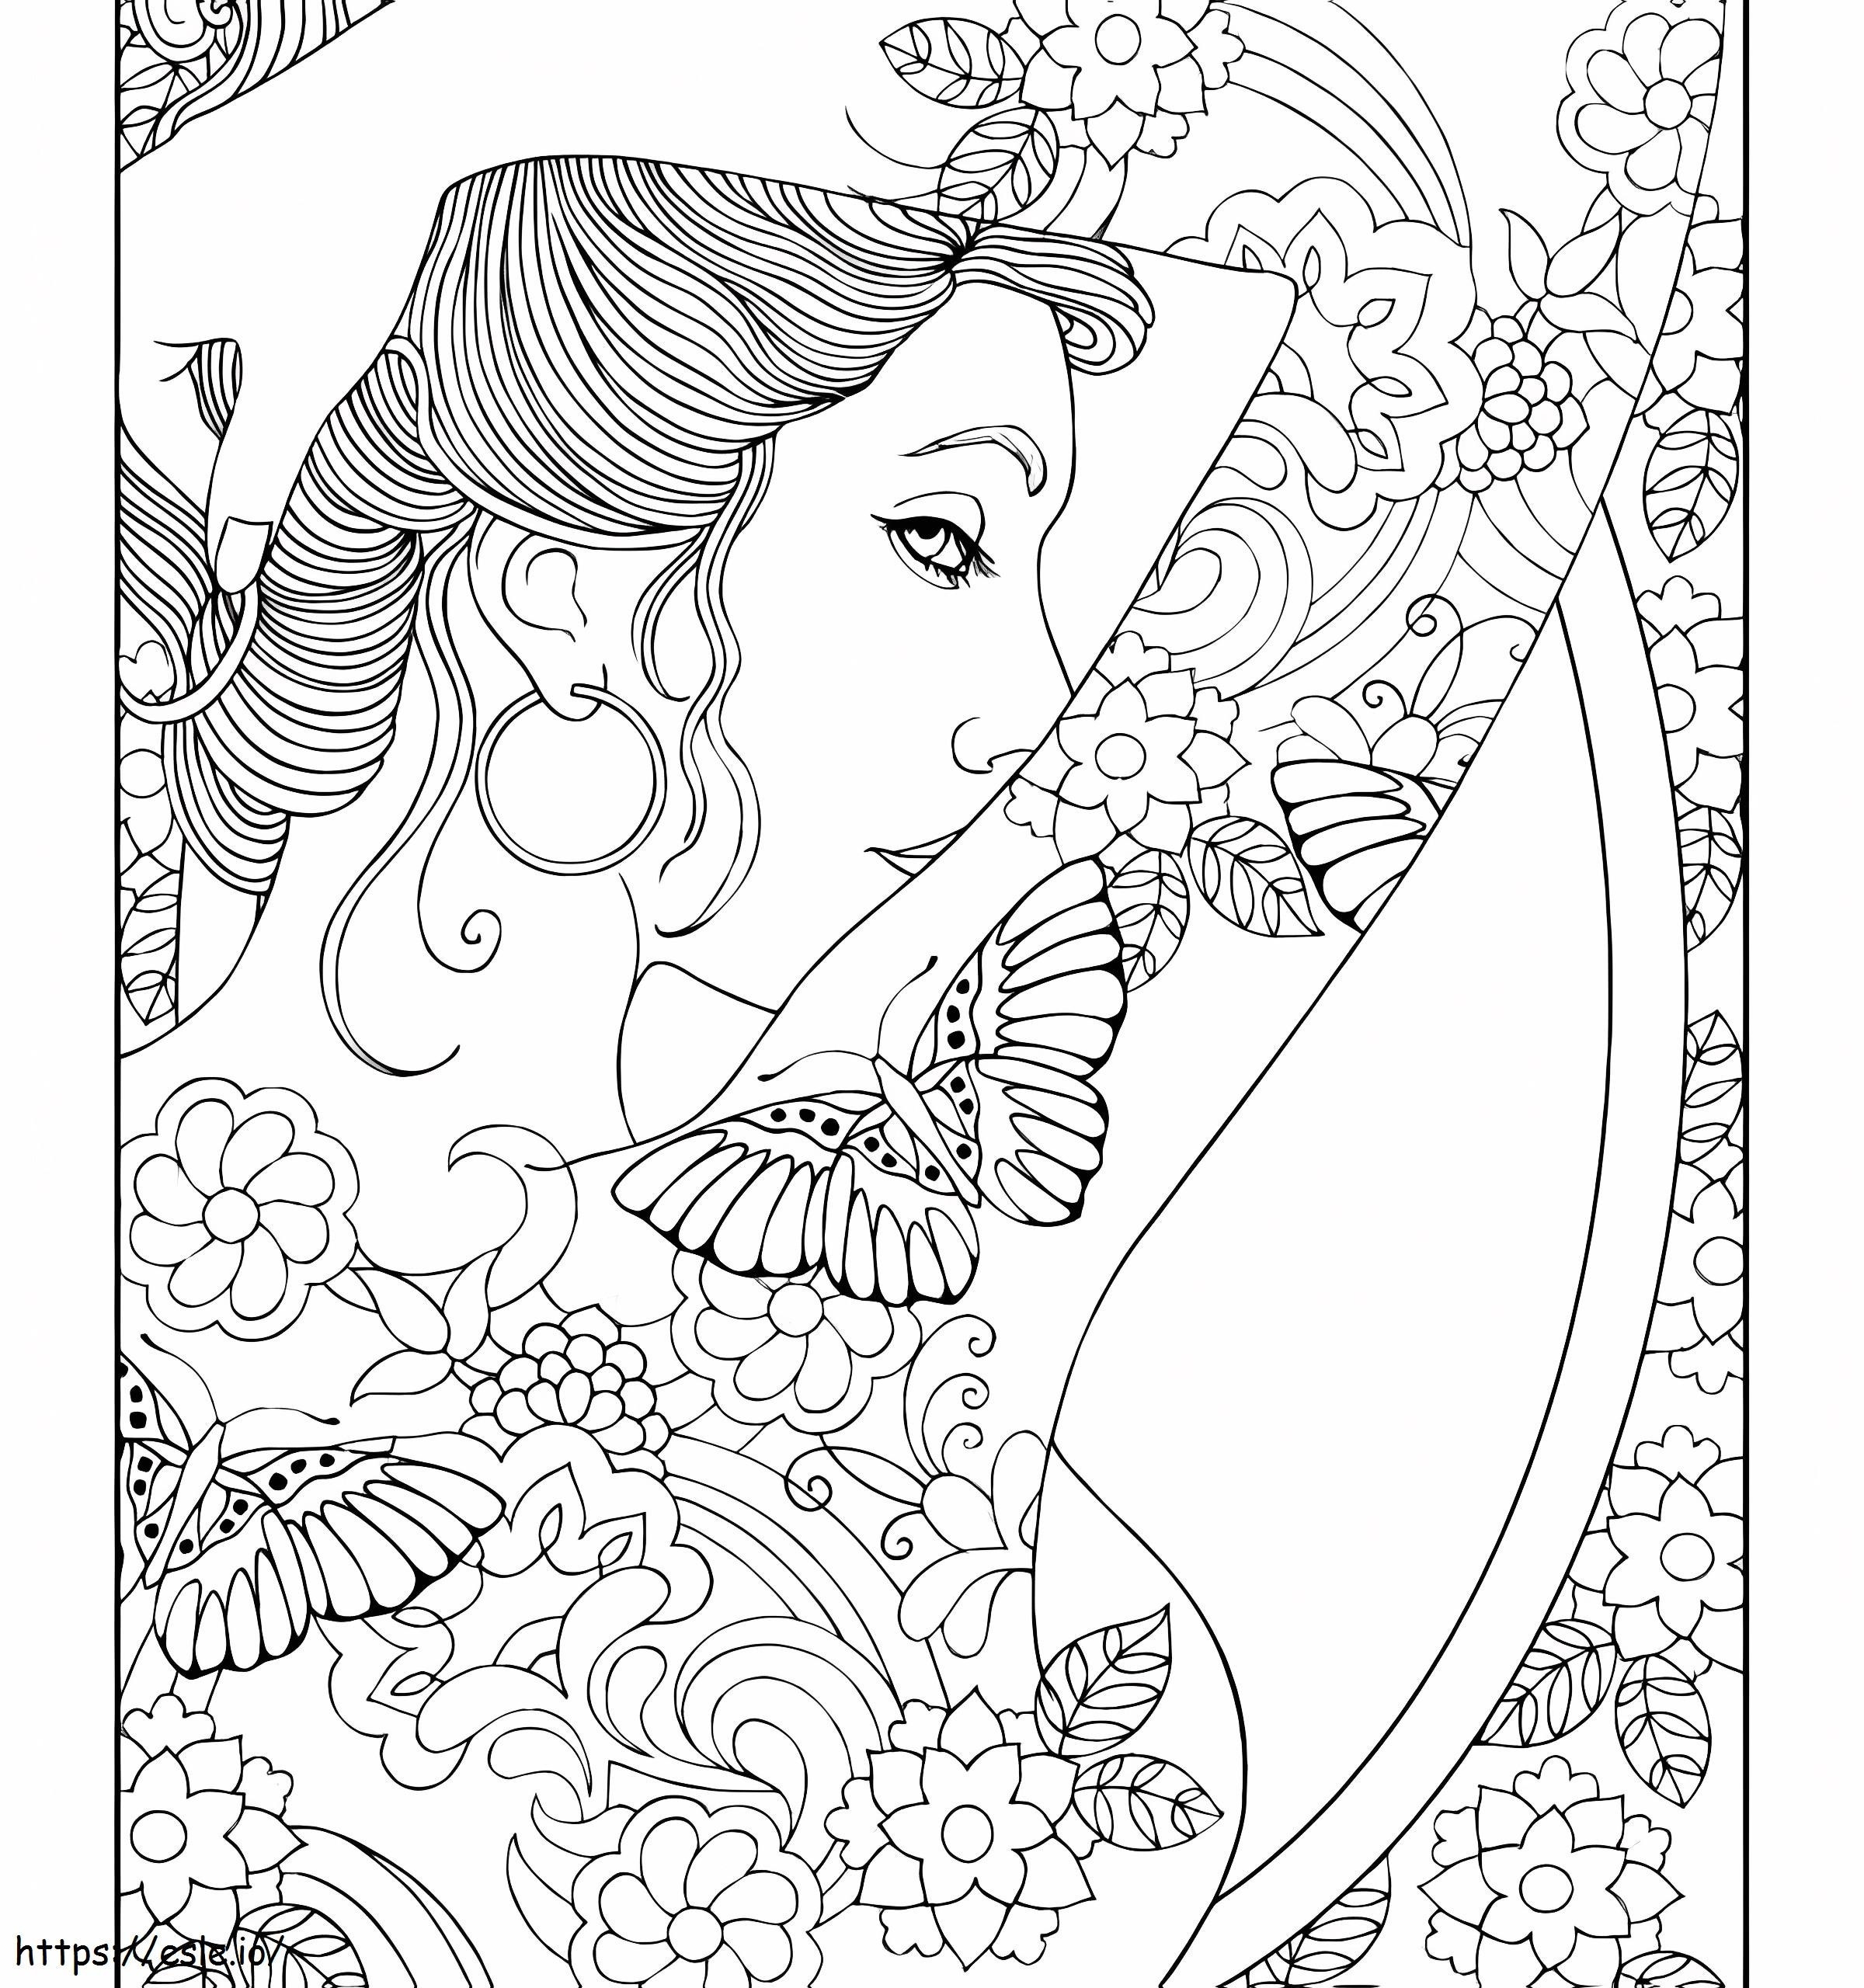 Tattooed Girl coloring page